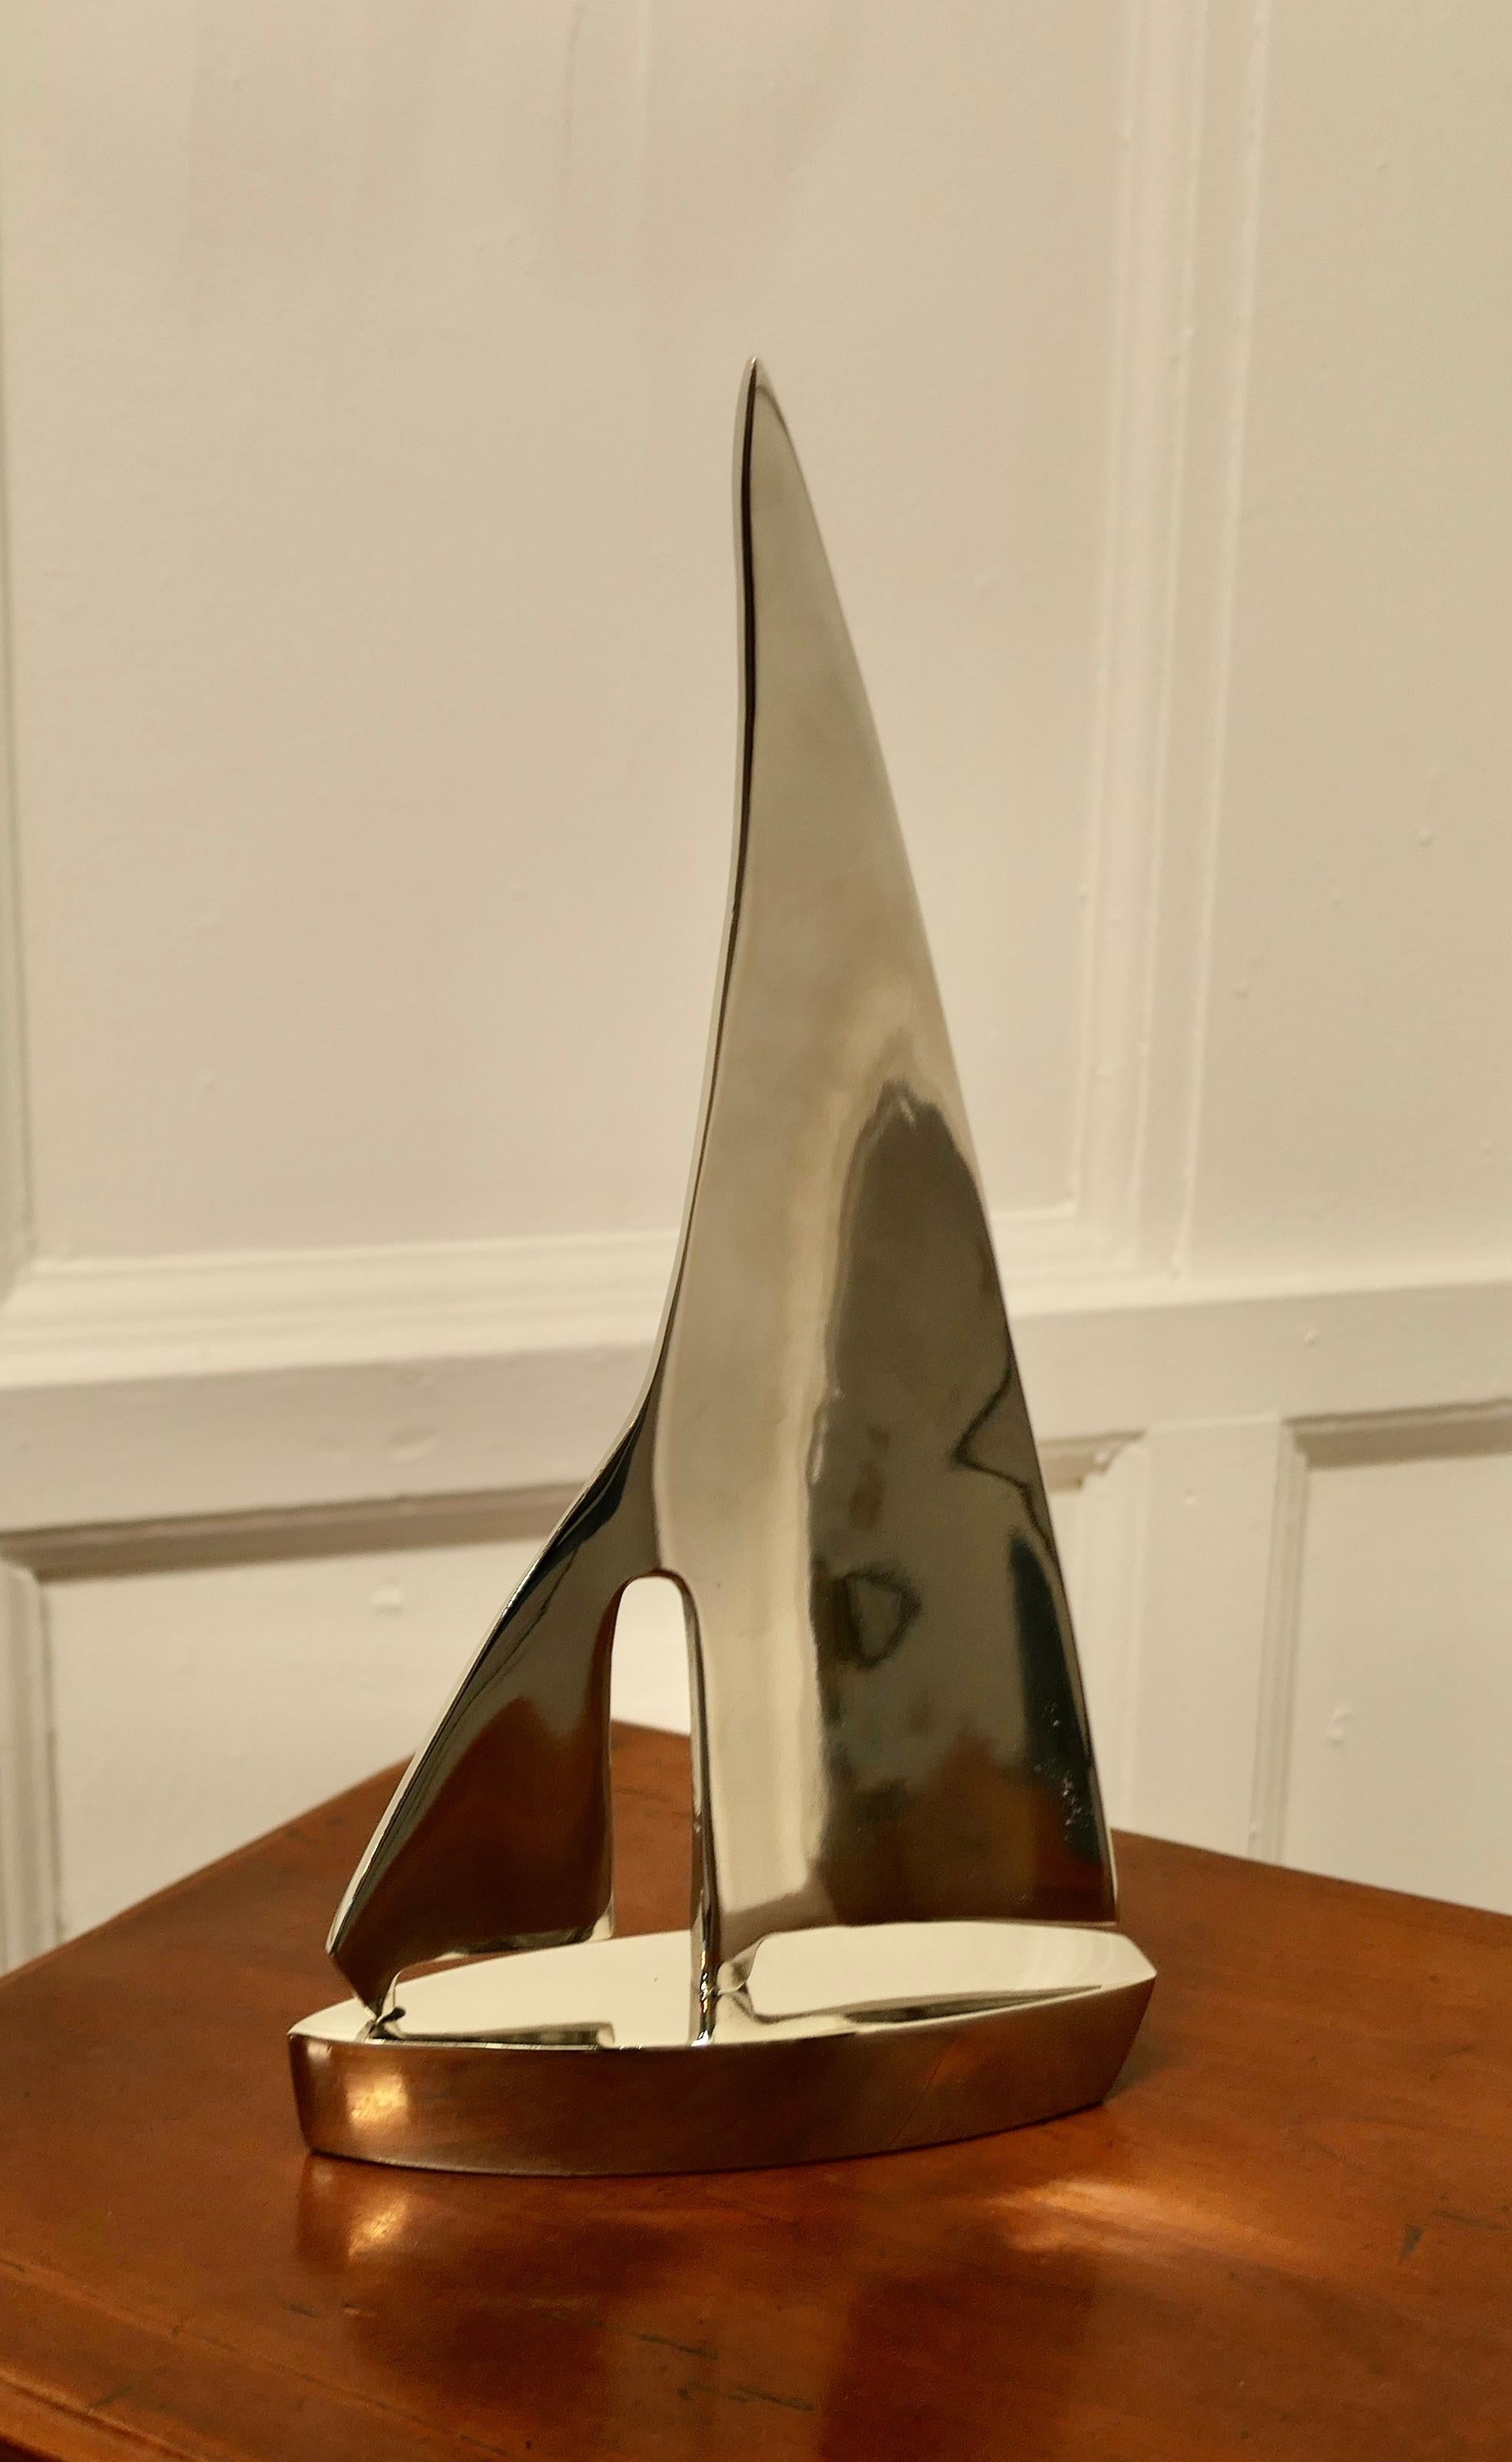 French chrome desktop model of a yacht.

A super piece and a great desk ornament for the sailor that has everything else. 
This model is polished to a highly reflective stream line chrome finish.
It is in very good condition, it is 7.5” long,